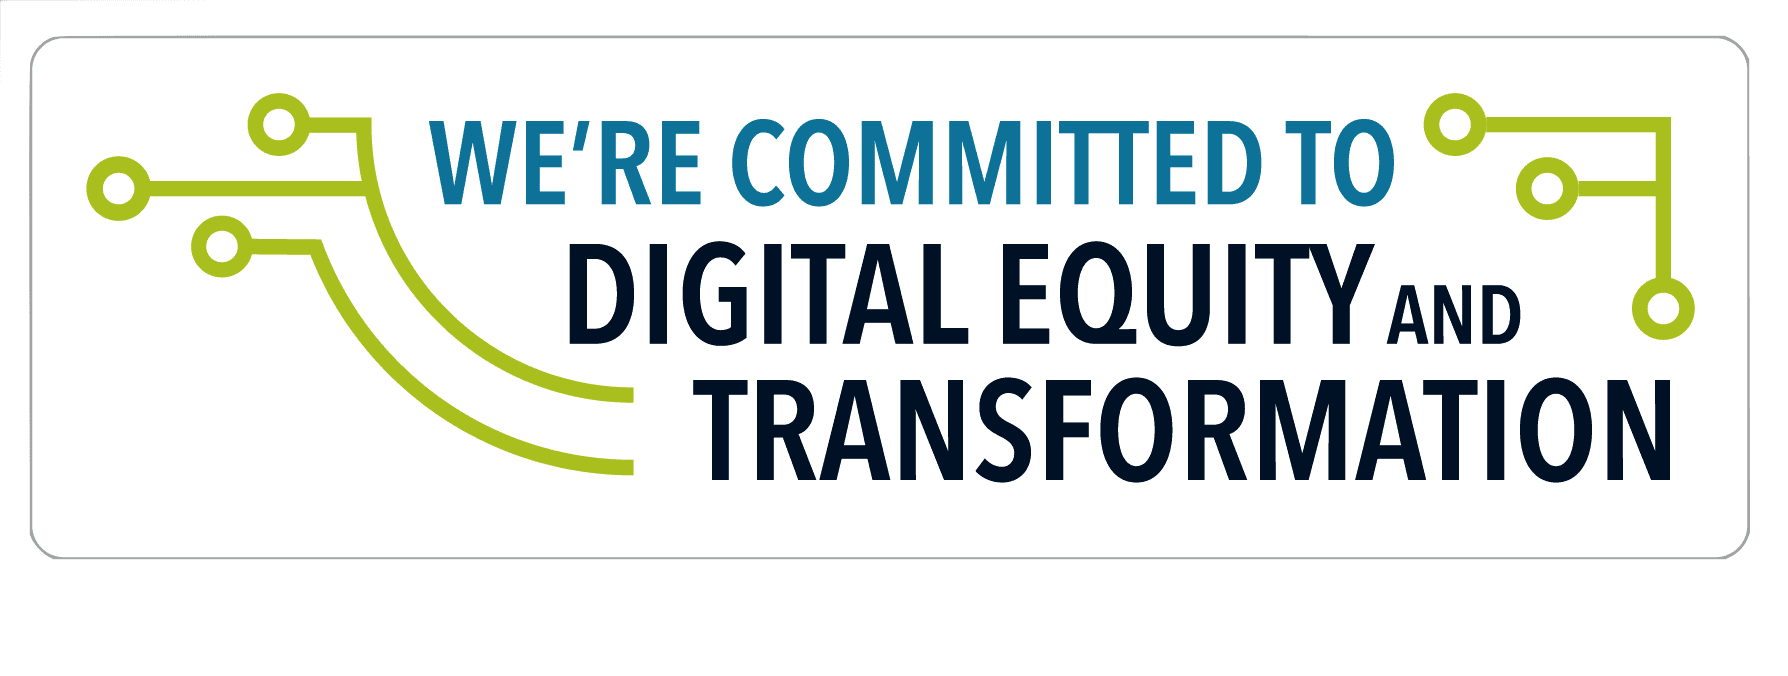 Digital Equity and Transformation Pledge Badge